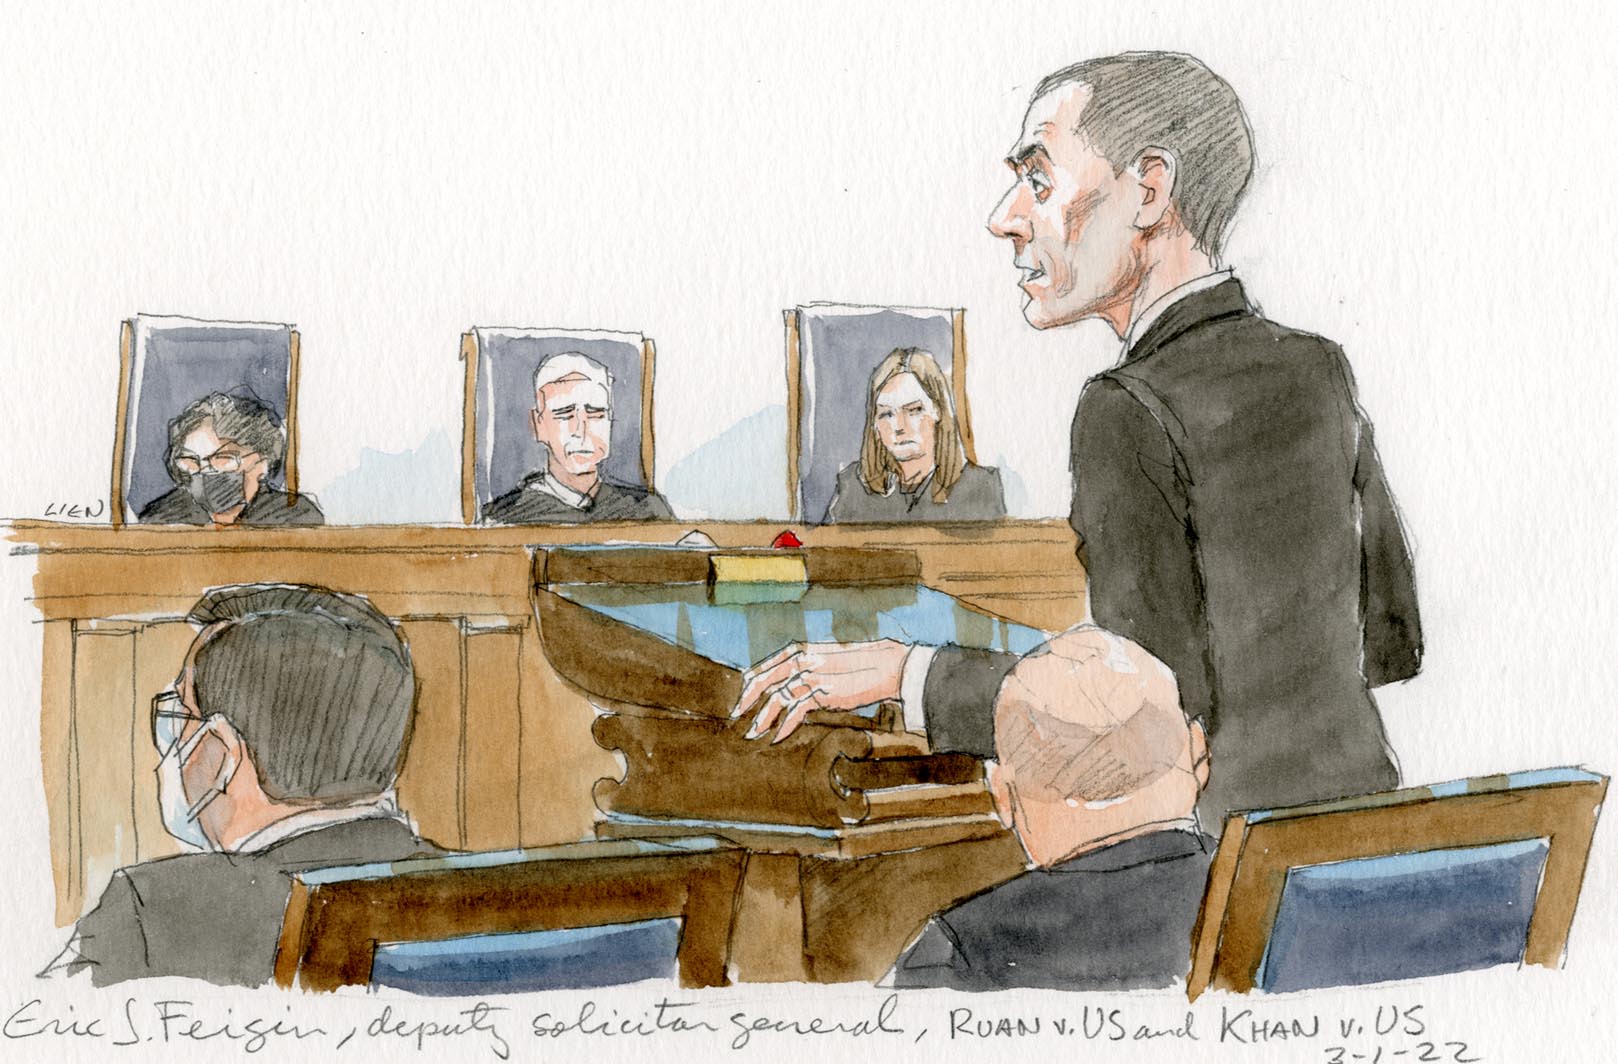 man in dark suit stands at lectern in front of three justices on the bench